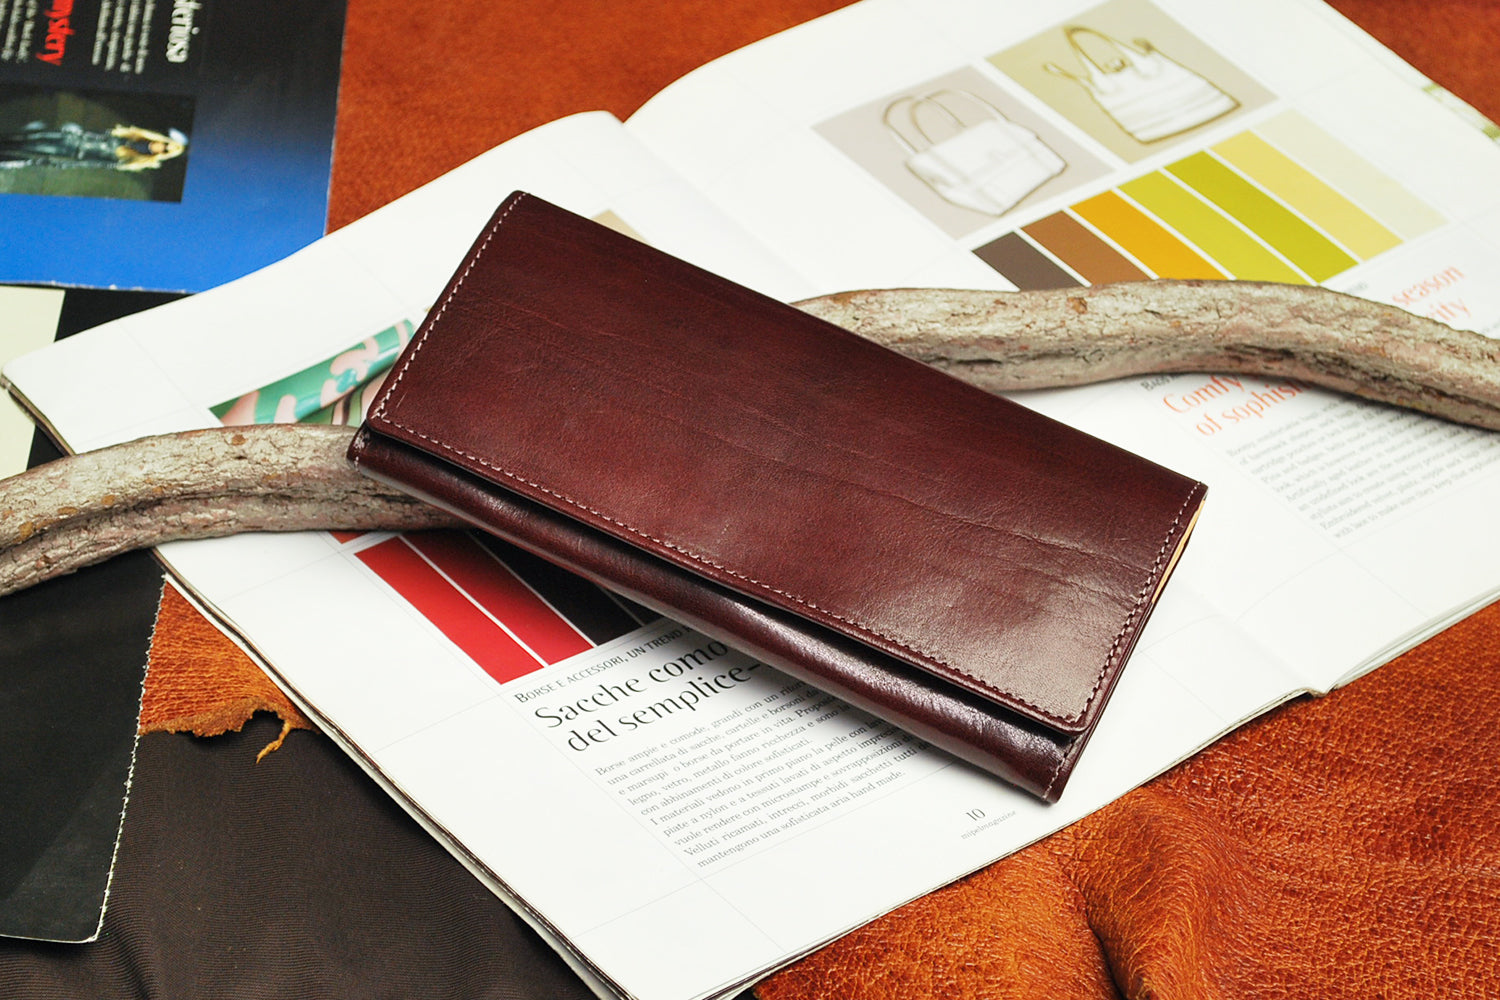 FU-SI FERNALLE / OLFAS Fits comfortably in your hand. A long wallet made of high-quality Italian leather with a rich taste